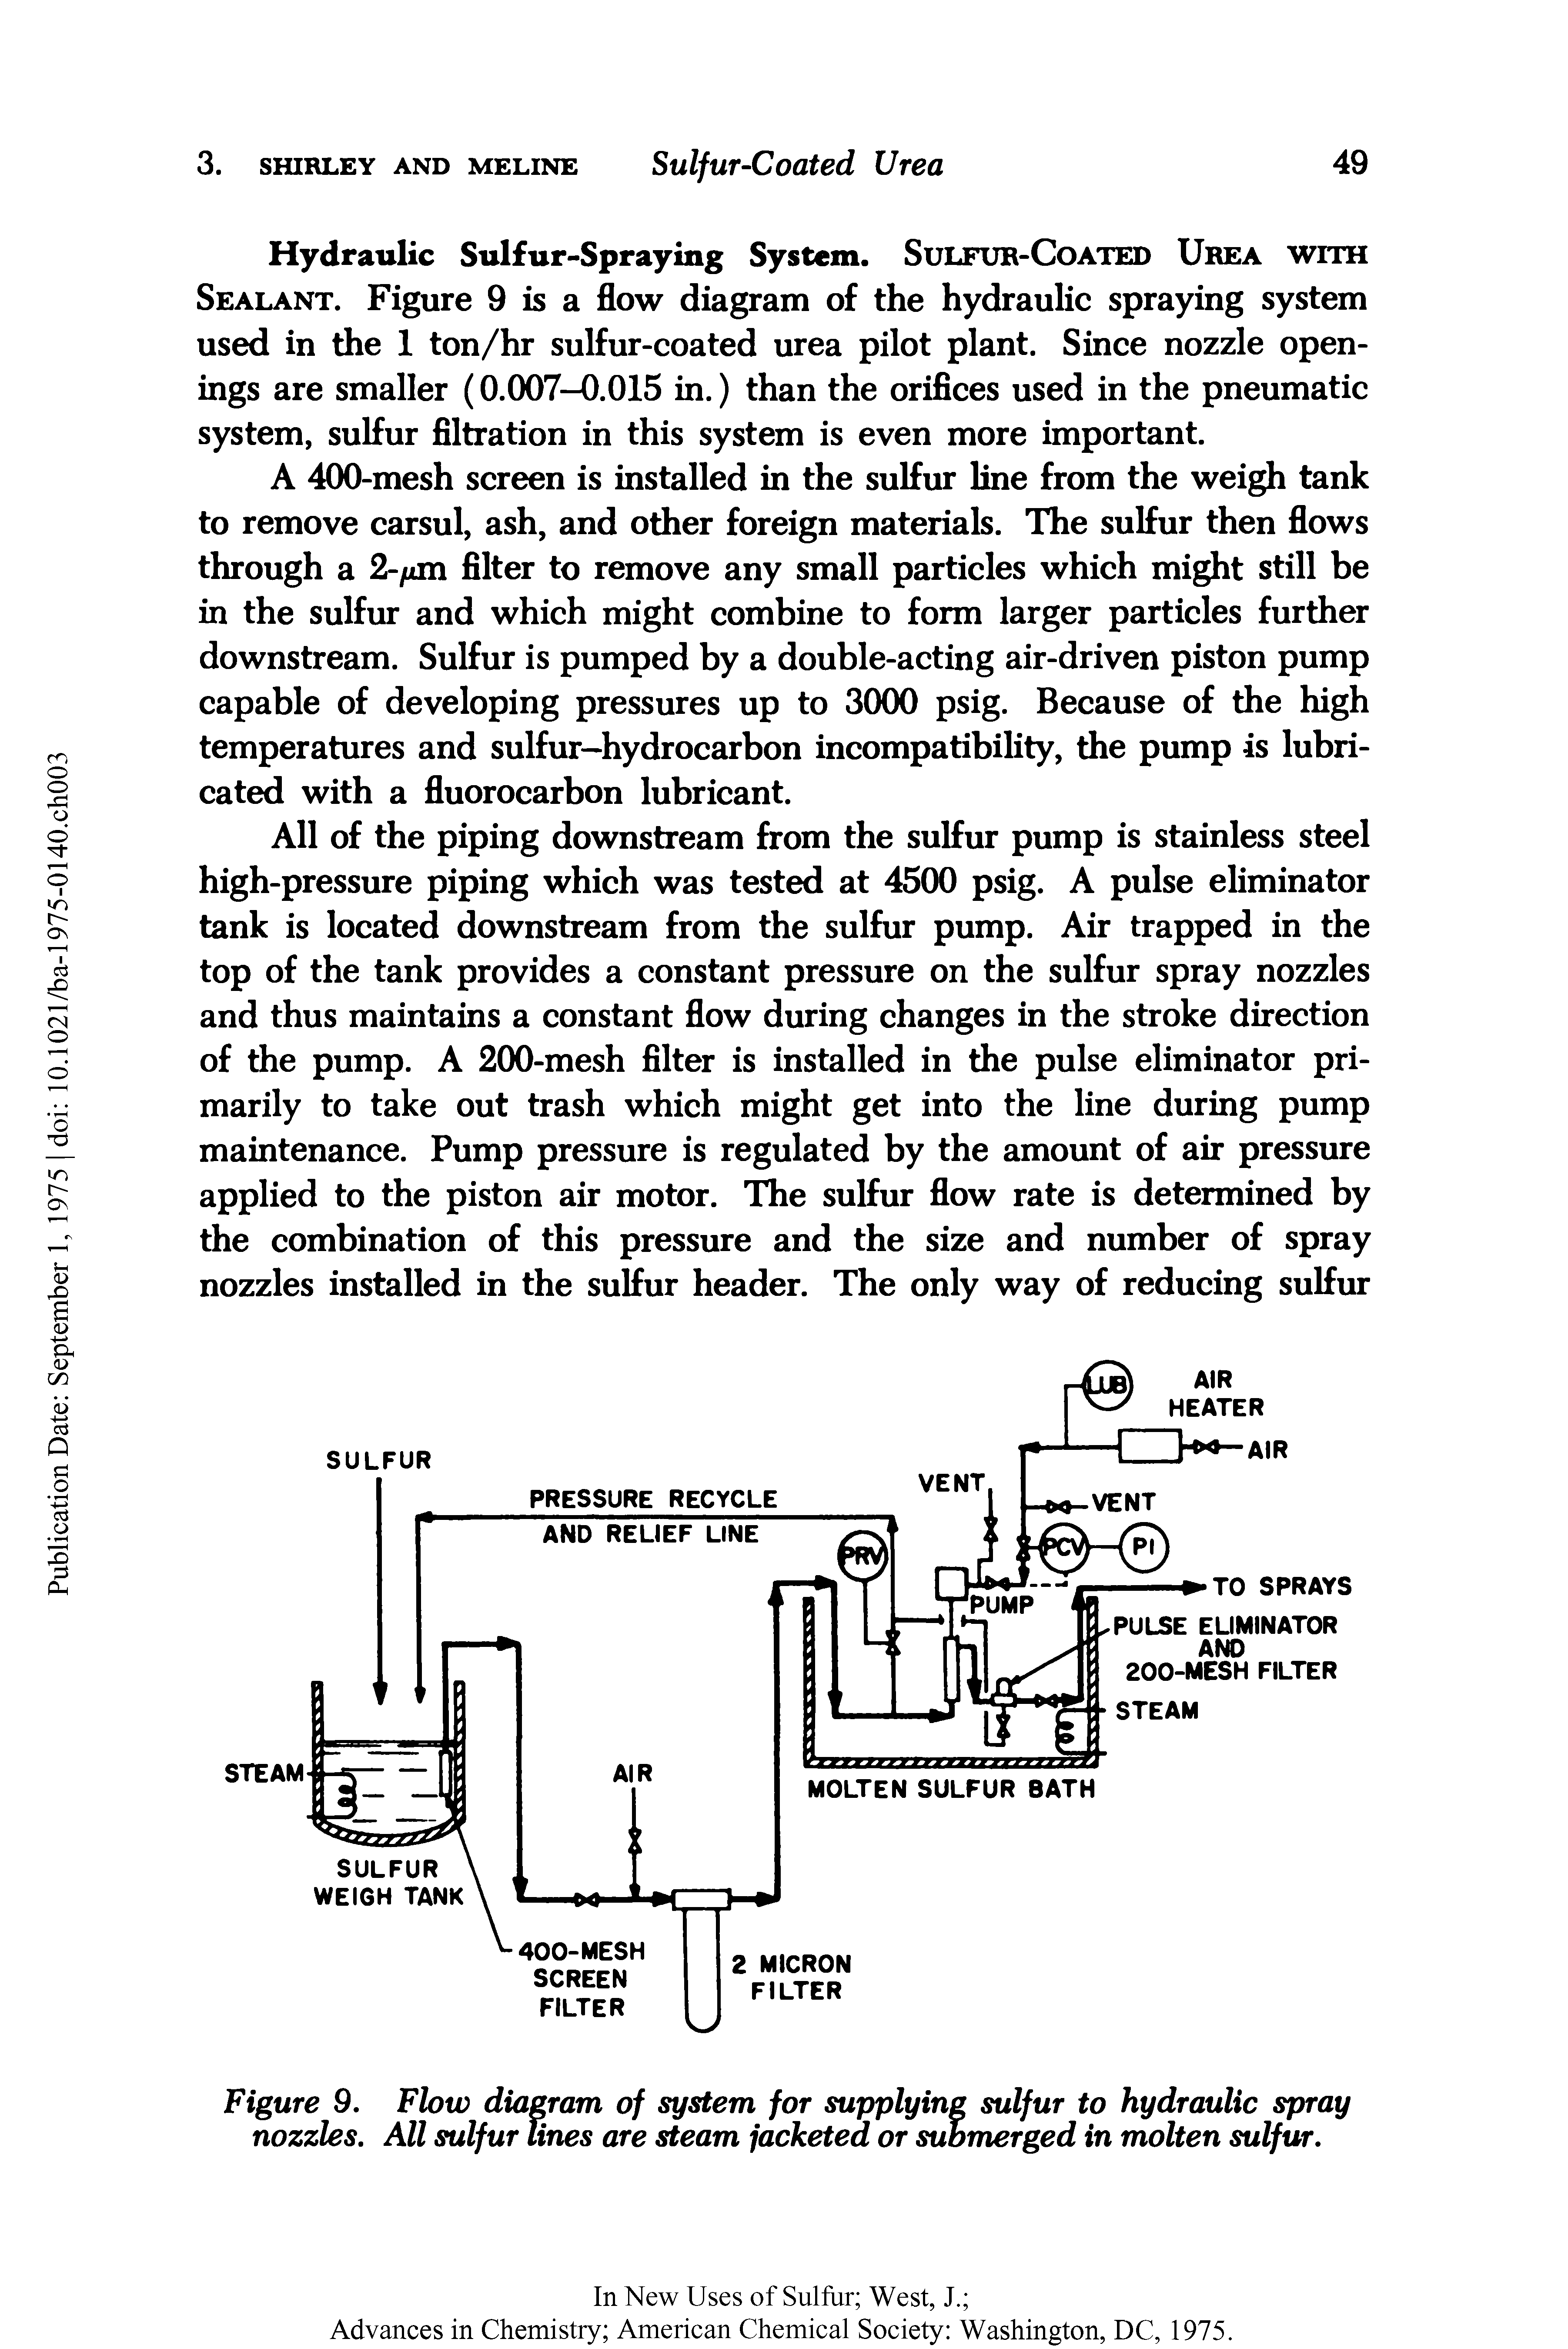 Figure 9. Flow diagram of system for supplying sulfur to hydraulic spray nozzles. All sulfur lines are steam jacketed or submerged in molten sulfur.